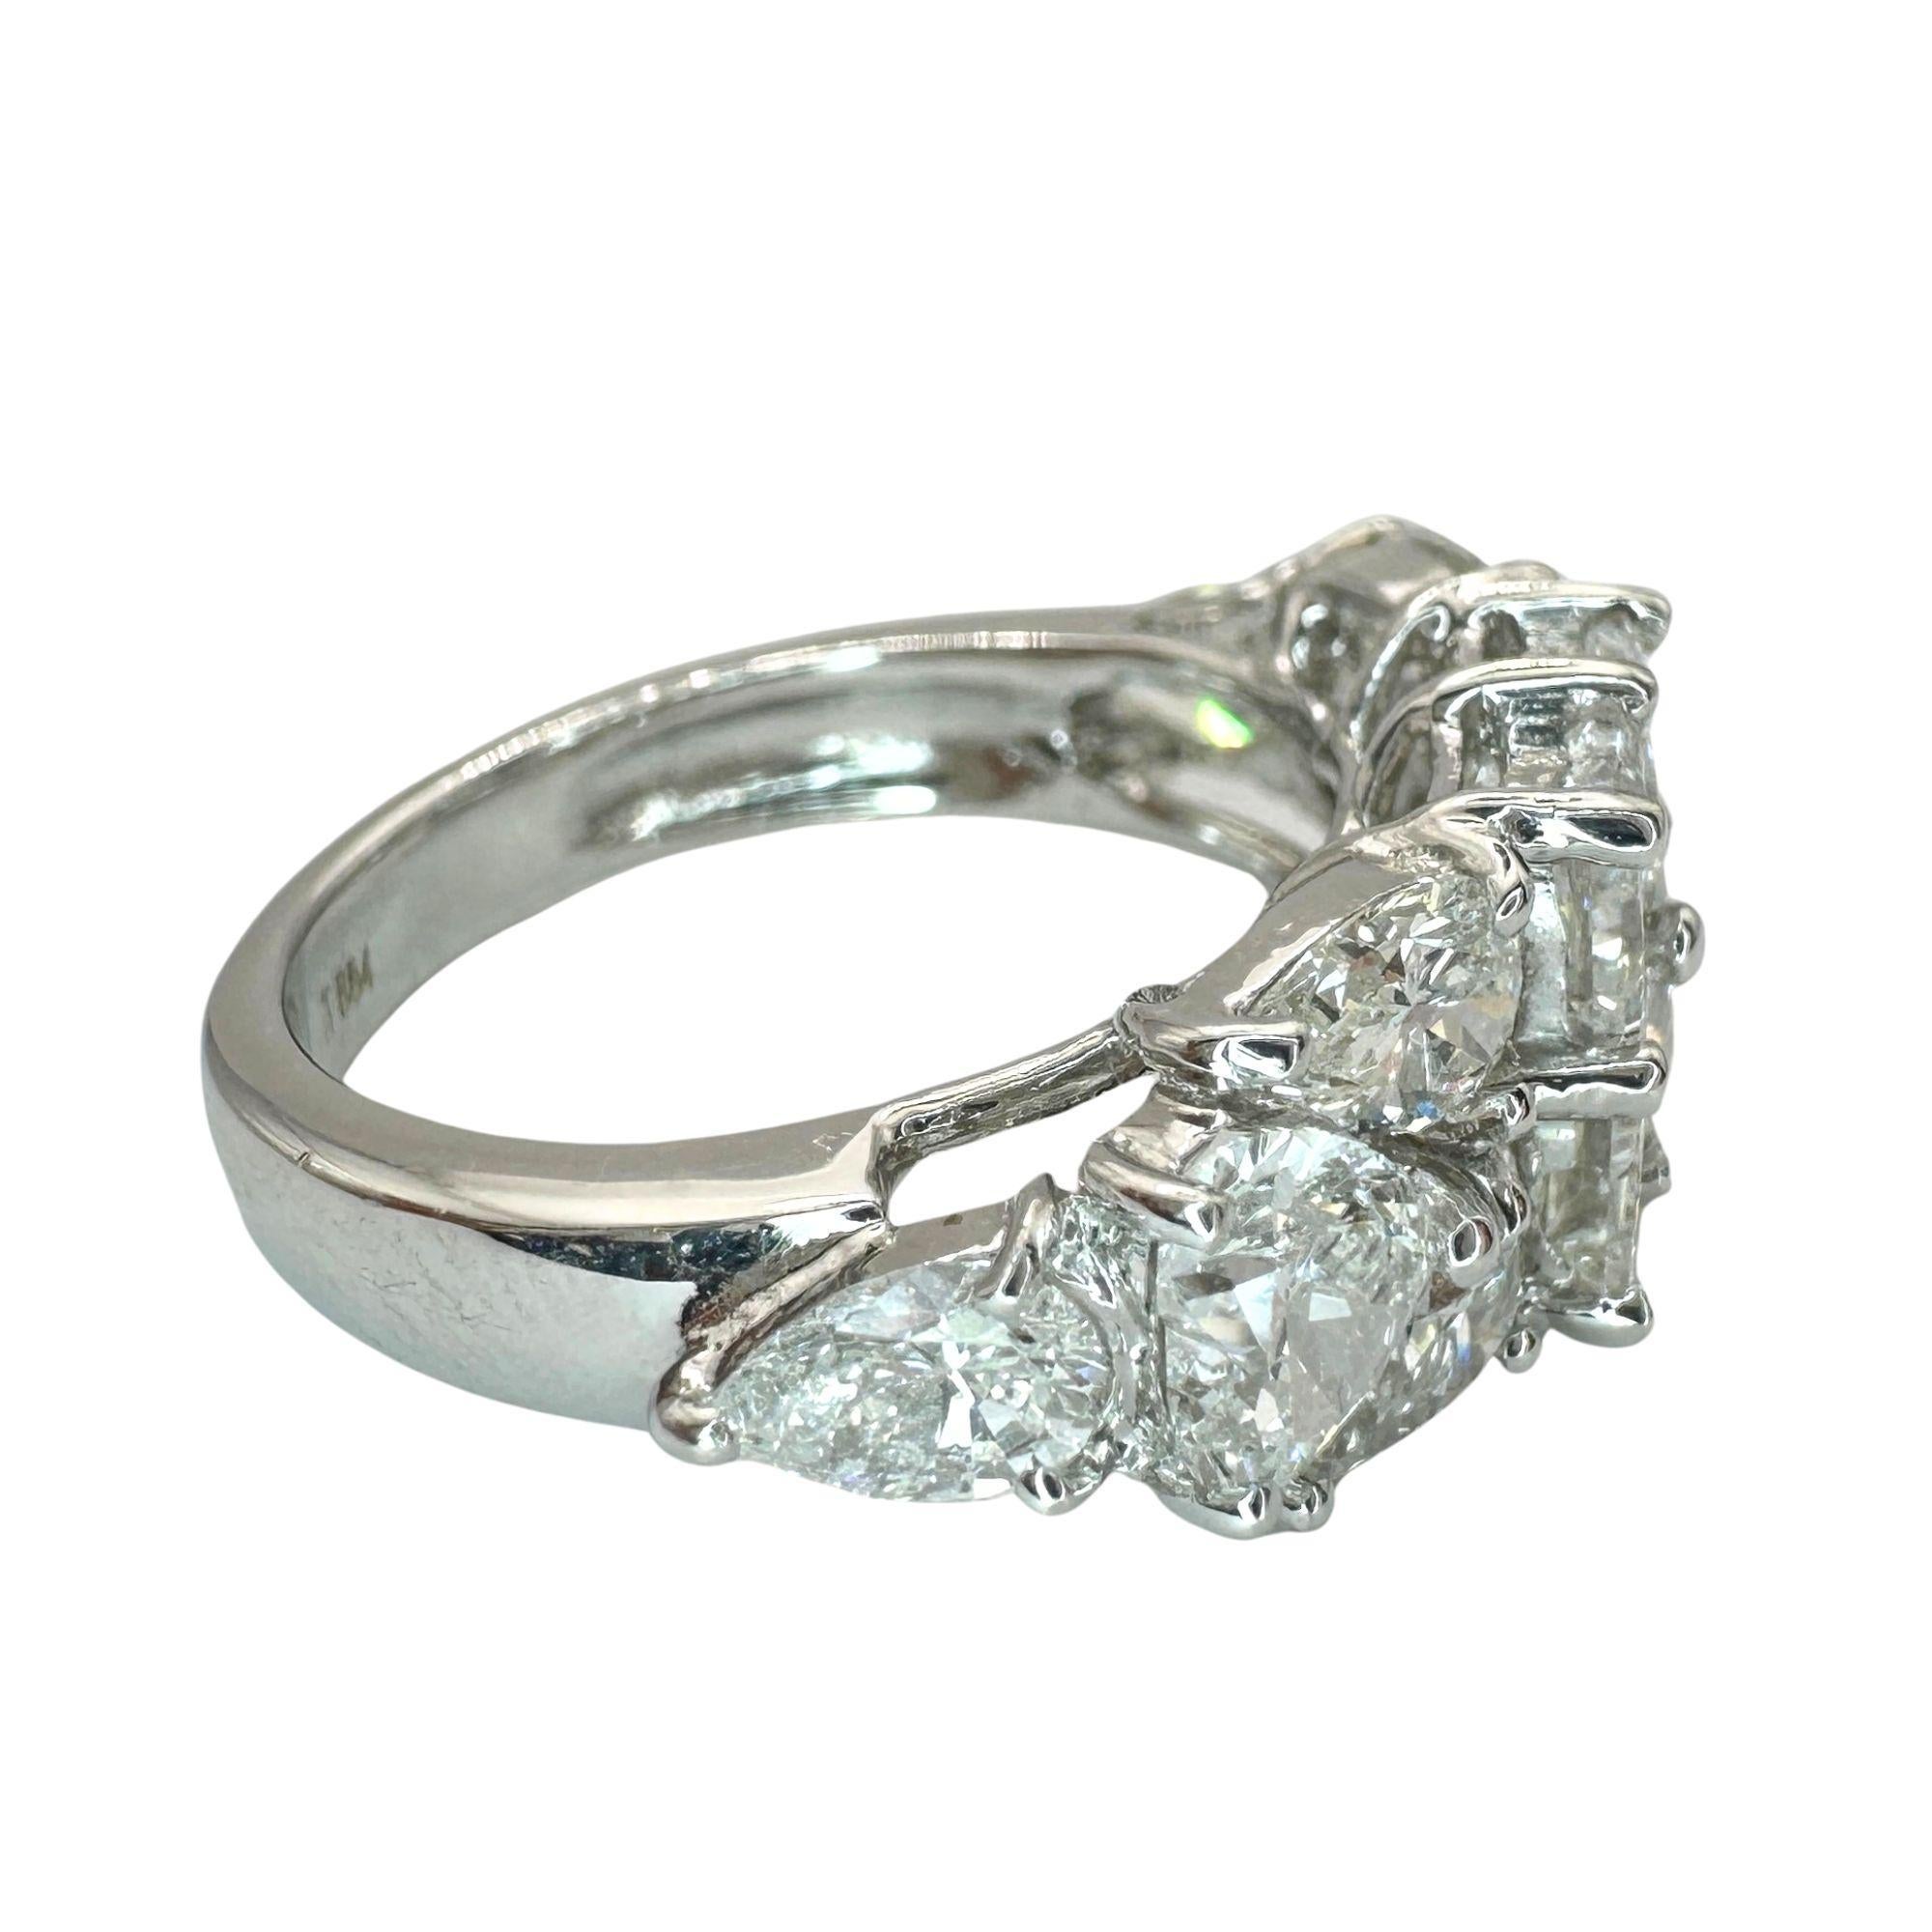 This stunning 18k Diamond Ring features a dazzling 3.89 carat diamond set in 18k white gold. In good condition with minimal wear, it is the perfect piece to add elegance and sophistication to any outfit. Its markings of 